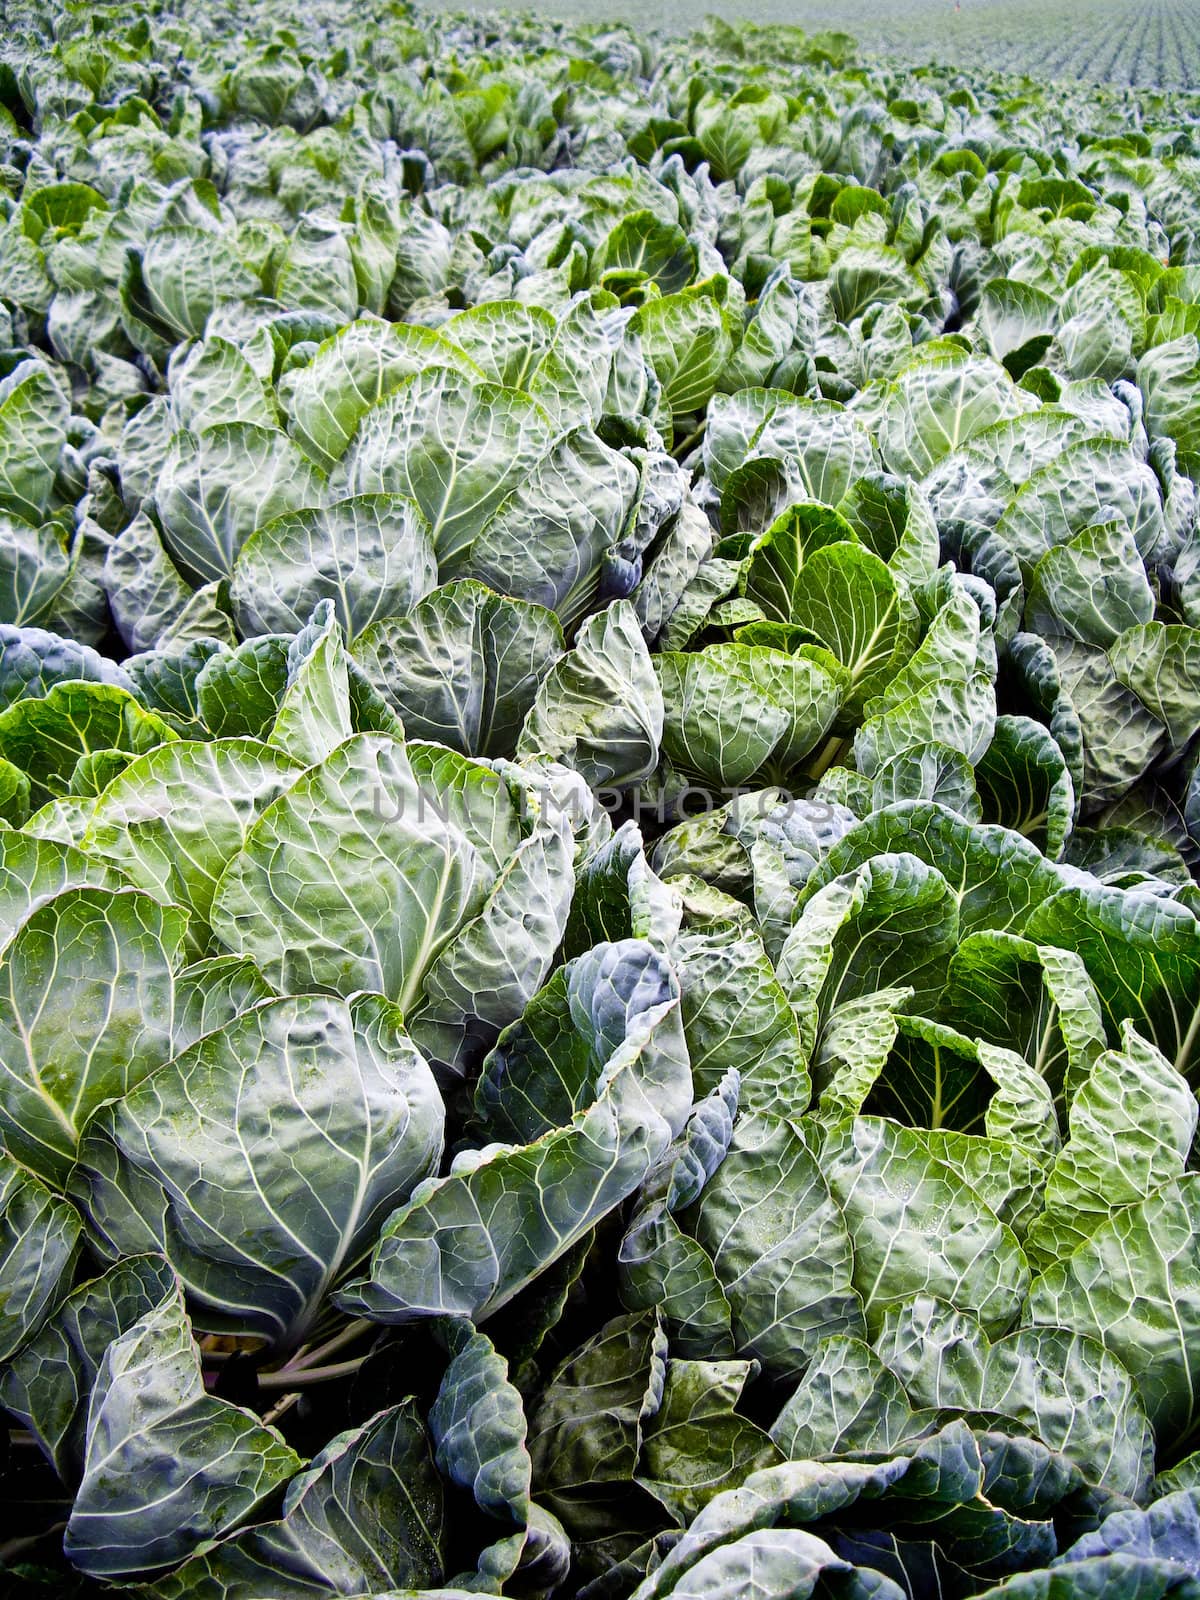 Field of dark green Brussel sprout leaves